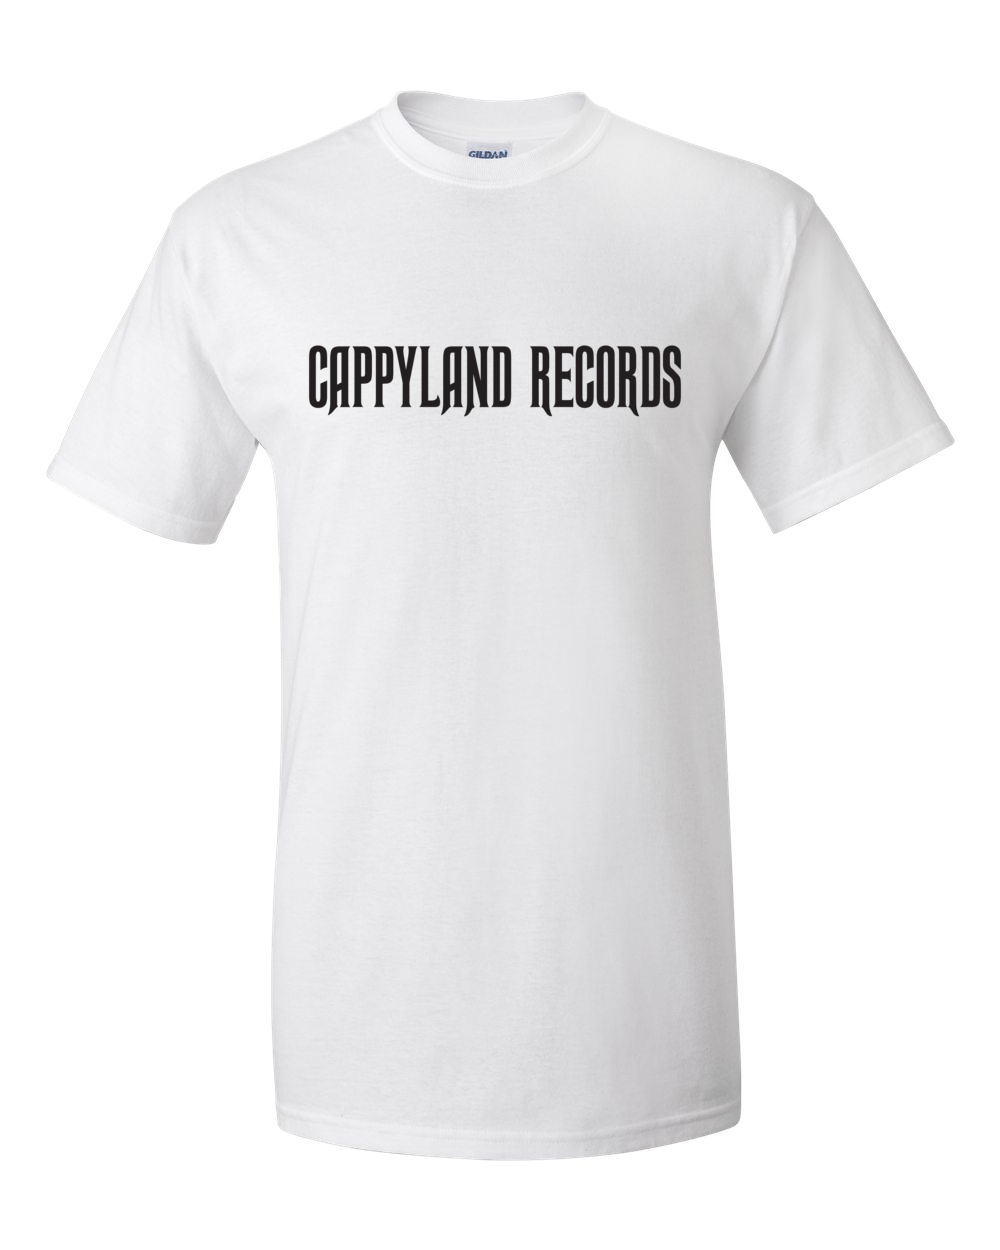 CAPPYLAND RECORDS "WHITE T"